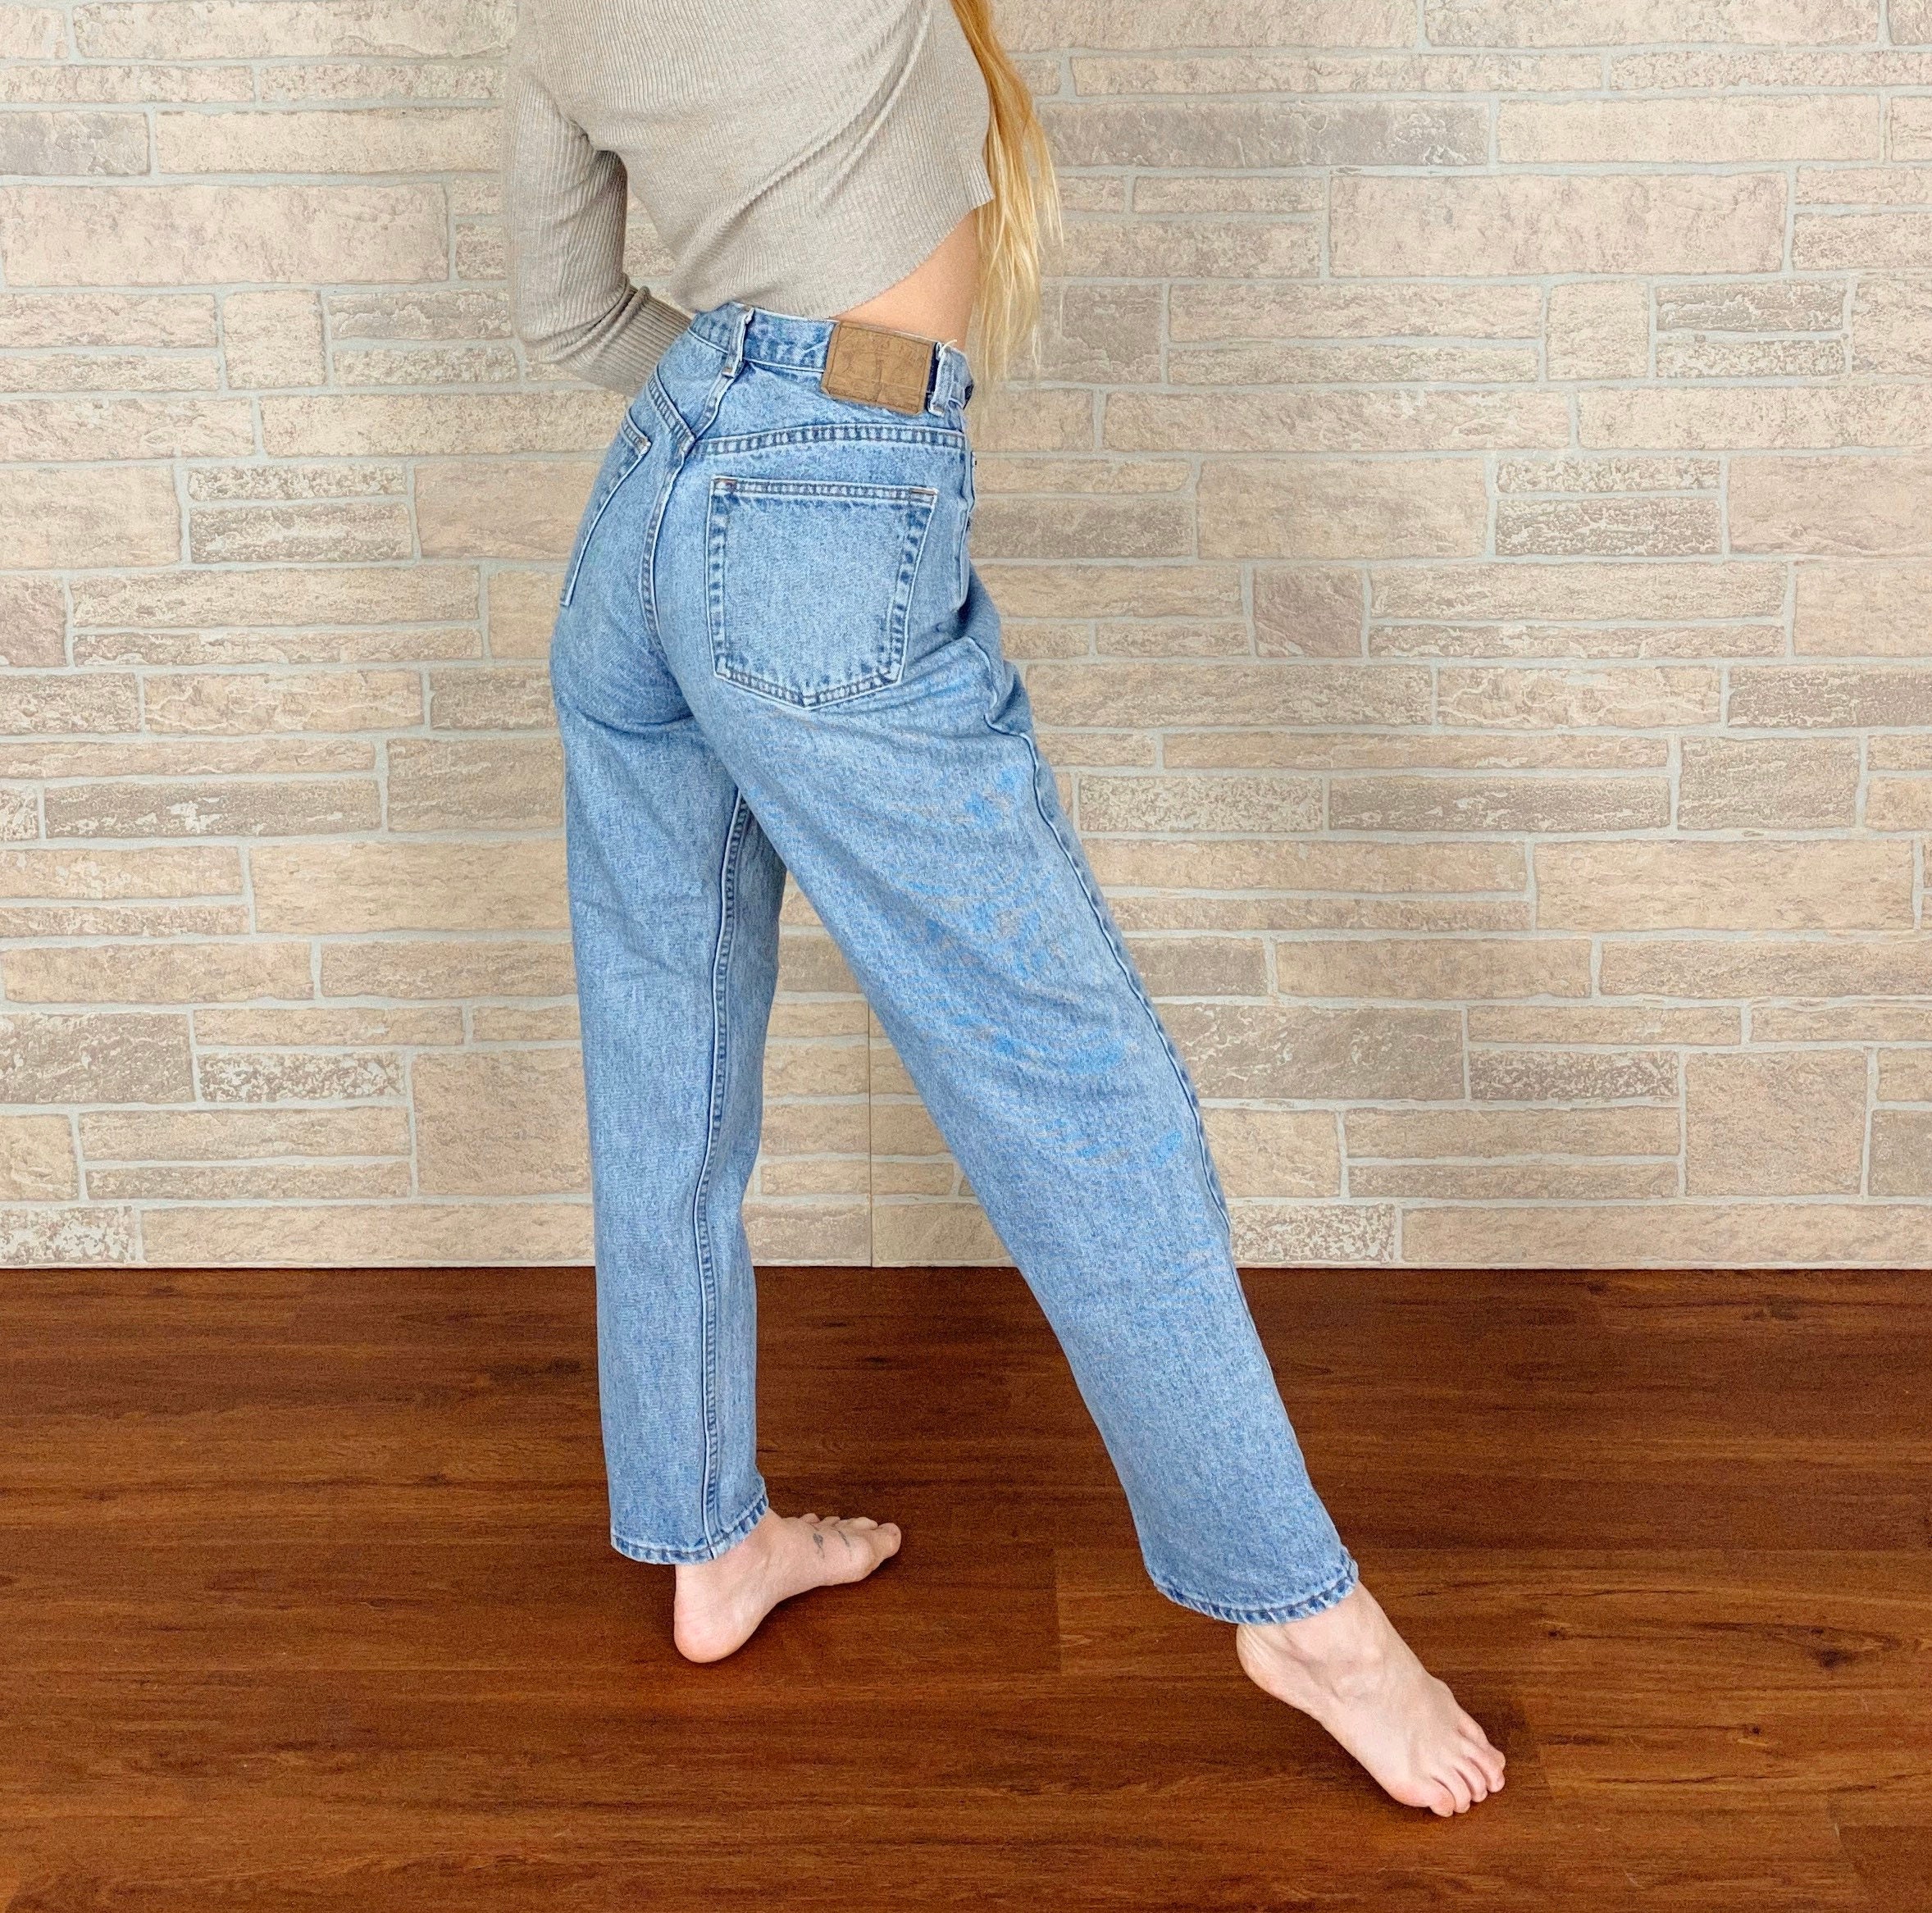 Gap Vintage High Waisted Jeans / Size 27